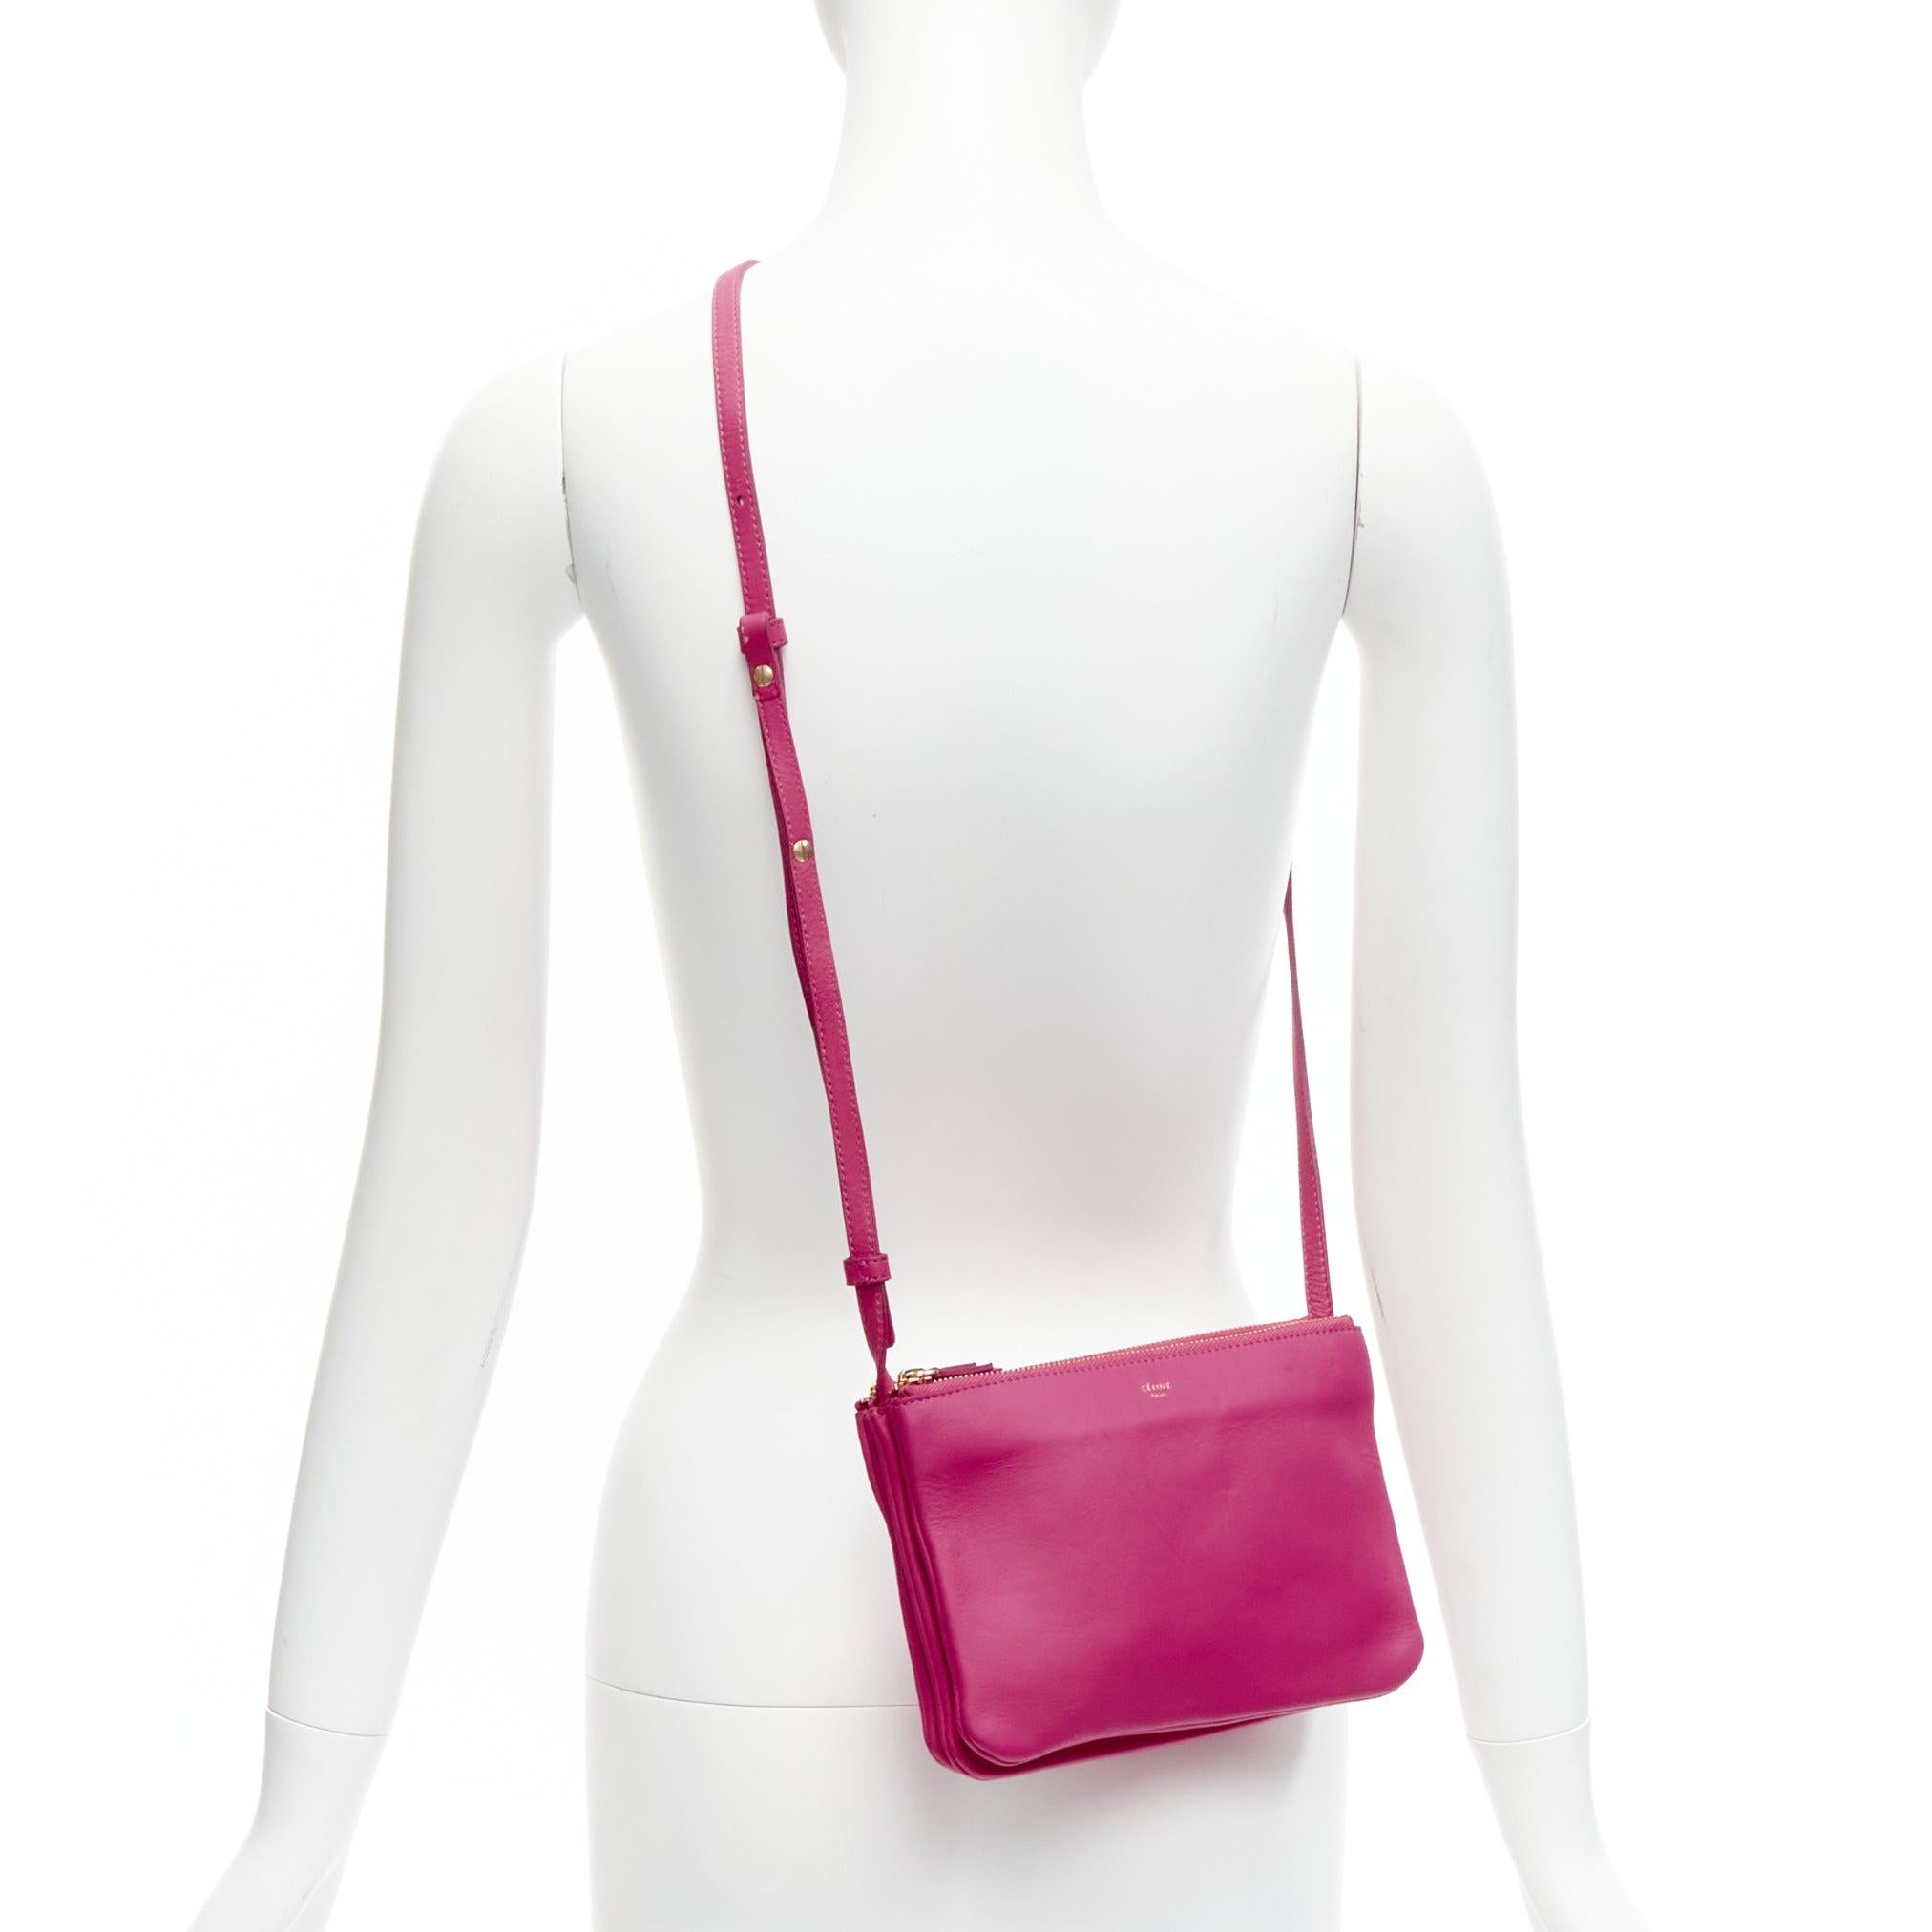 CELINE Trio pink soft leather detachable shoulder strap medium pouch crossbody bag
Reference: BSHW/A00074
Brand: Celine
Designer: Phoebe Philo
Model: Trio
Material: Leather
Color: Pink
Pattern: Solid
Closure: Zip
Lining: Grey Fabric
Extra Details: